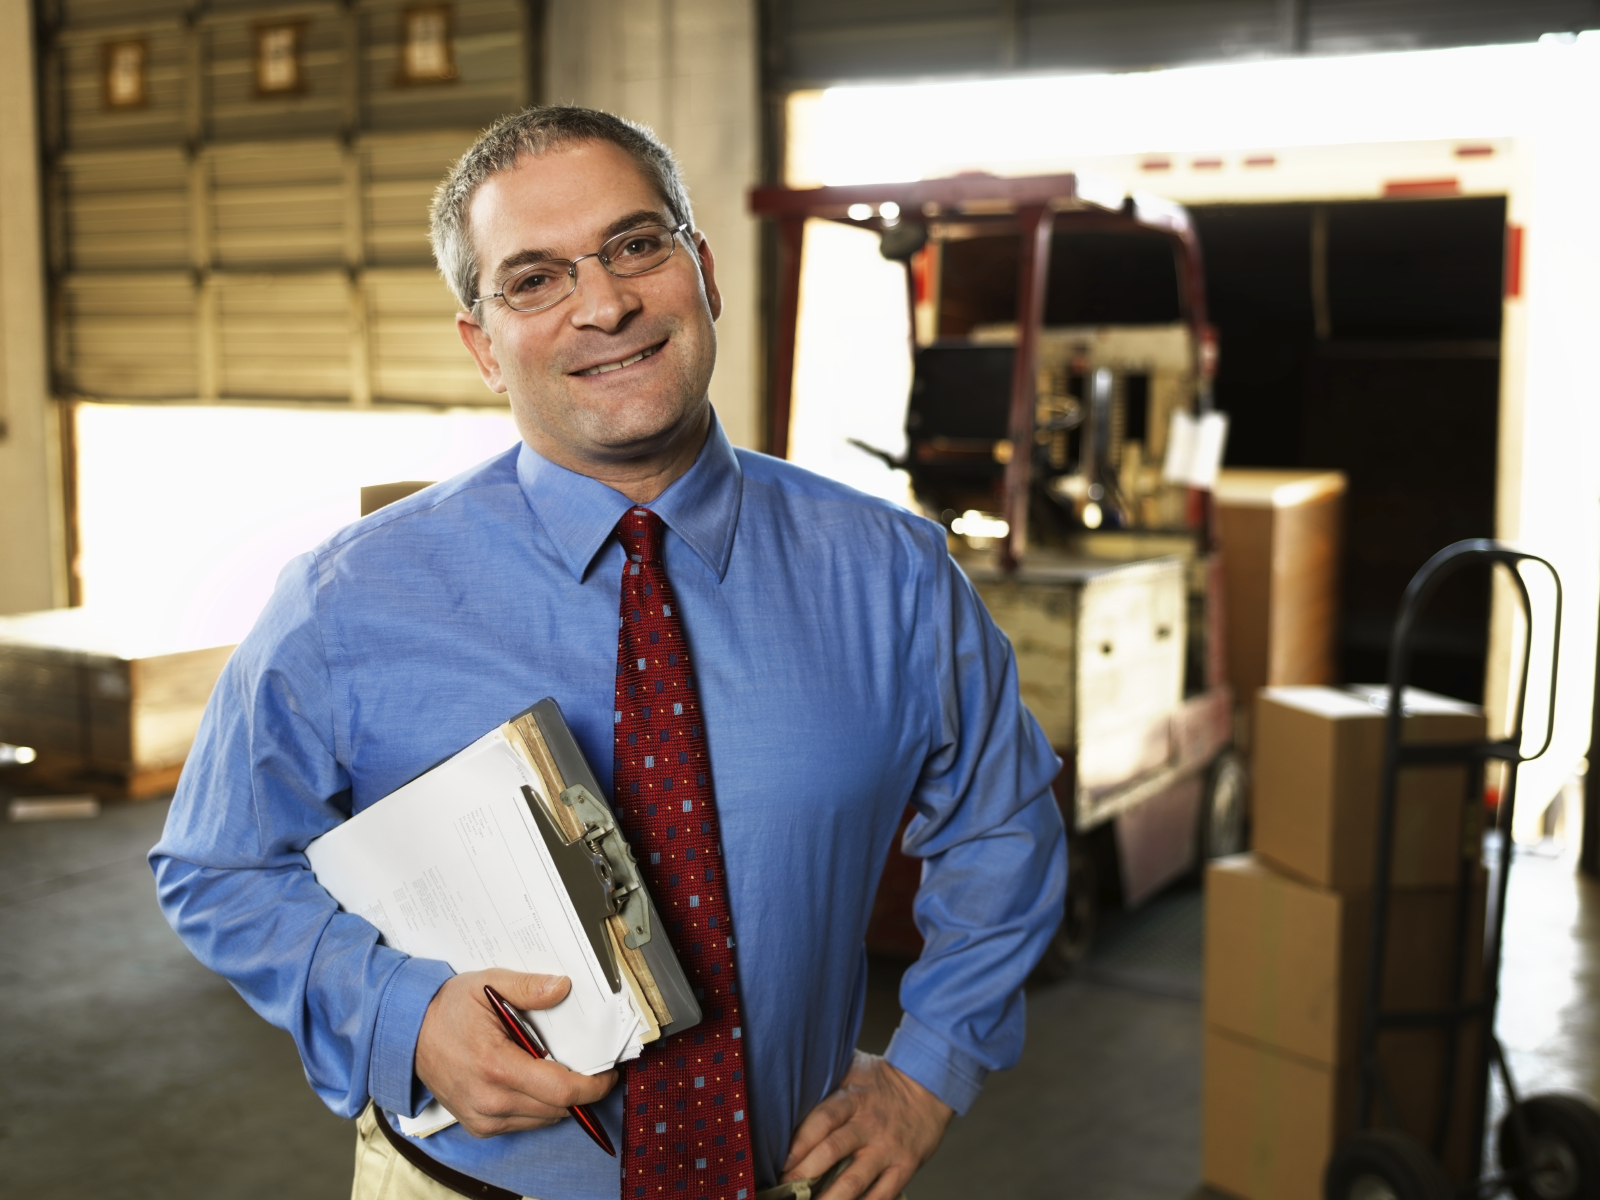 Portrait of Businessman in a Warehouse